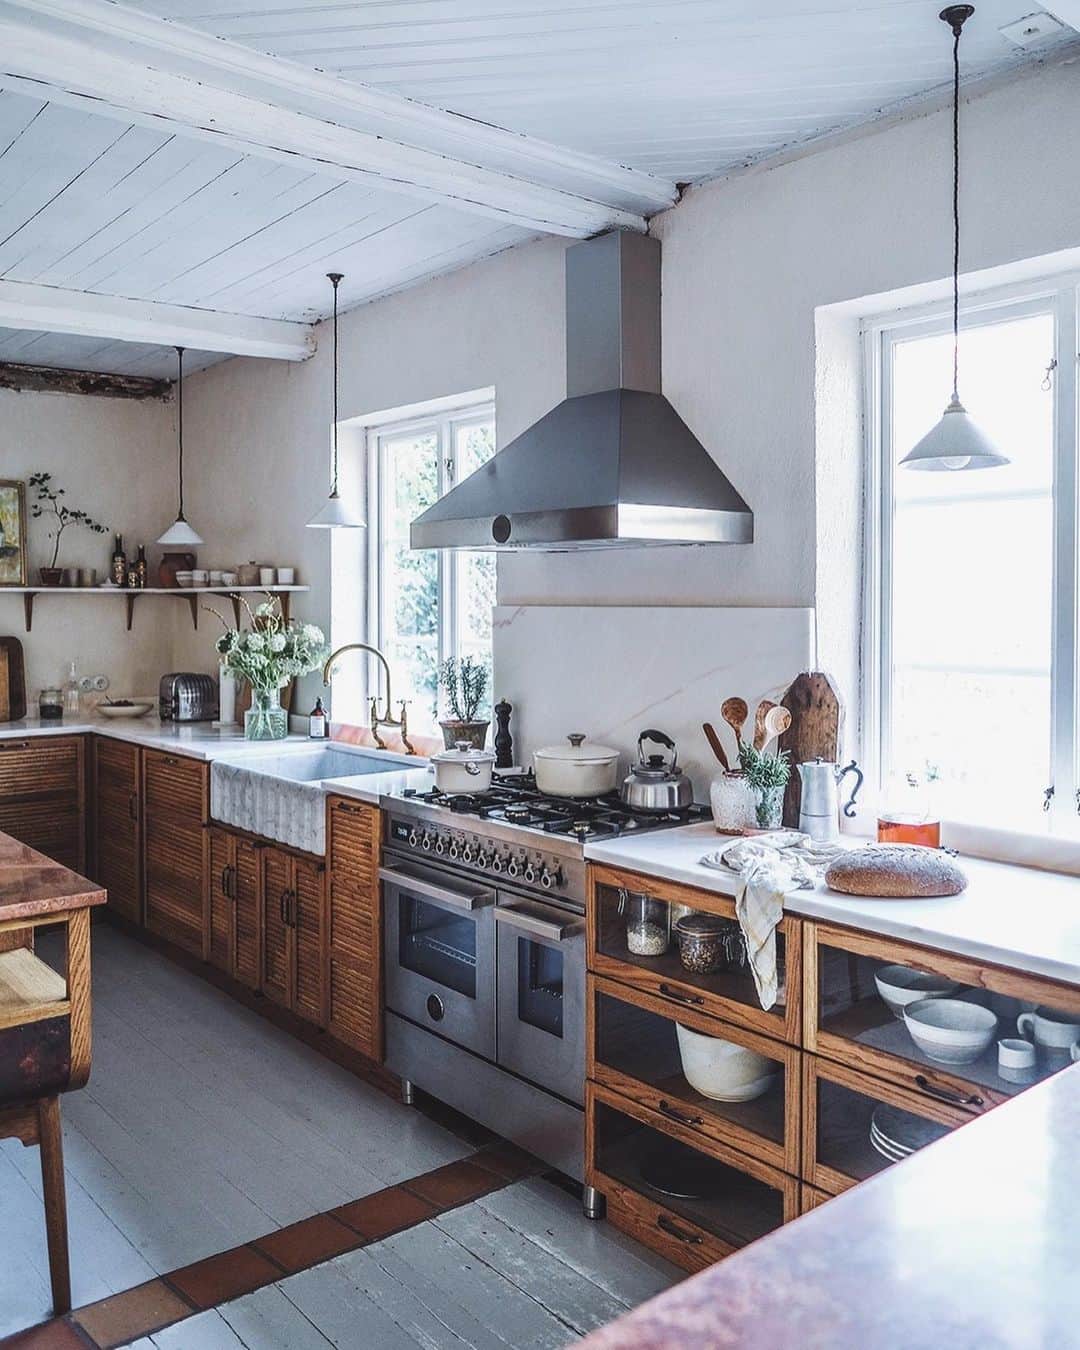 Our Food Storiesのインスタグラム：「More photos of our swedish kitchen ❤️ Missing this place so much right now and can‘t wait to return soon🥰 See more photos on the blog, link is in profile. Happy weekend guys! #ourfoodstories_travel  ____ #kitcheninspiration #kitcheninspo #devolkitchens #bertazzoni #bertazzoniprofessionalseries #kalklitir #kalklitircalce #kitcheninterior #kitchendesign #vogueliving #scandinavianhome #scandinavianstyle #haberdashery #interior_and_living #interiorinspo #kitcheninterior #kitchendecor」